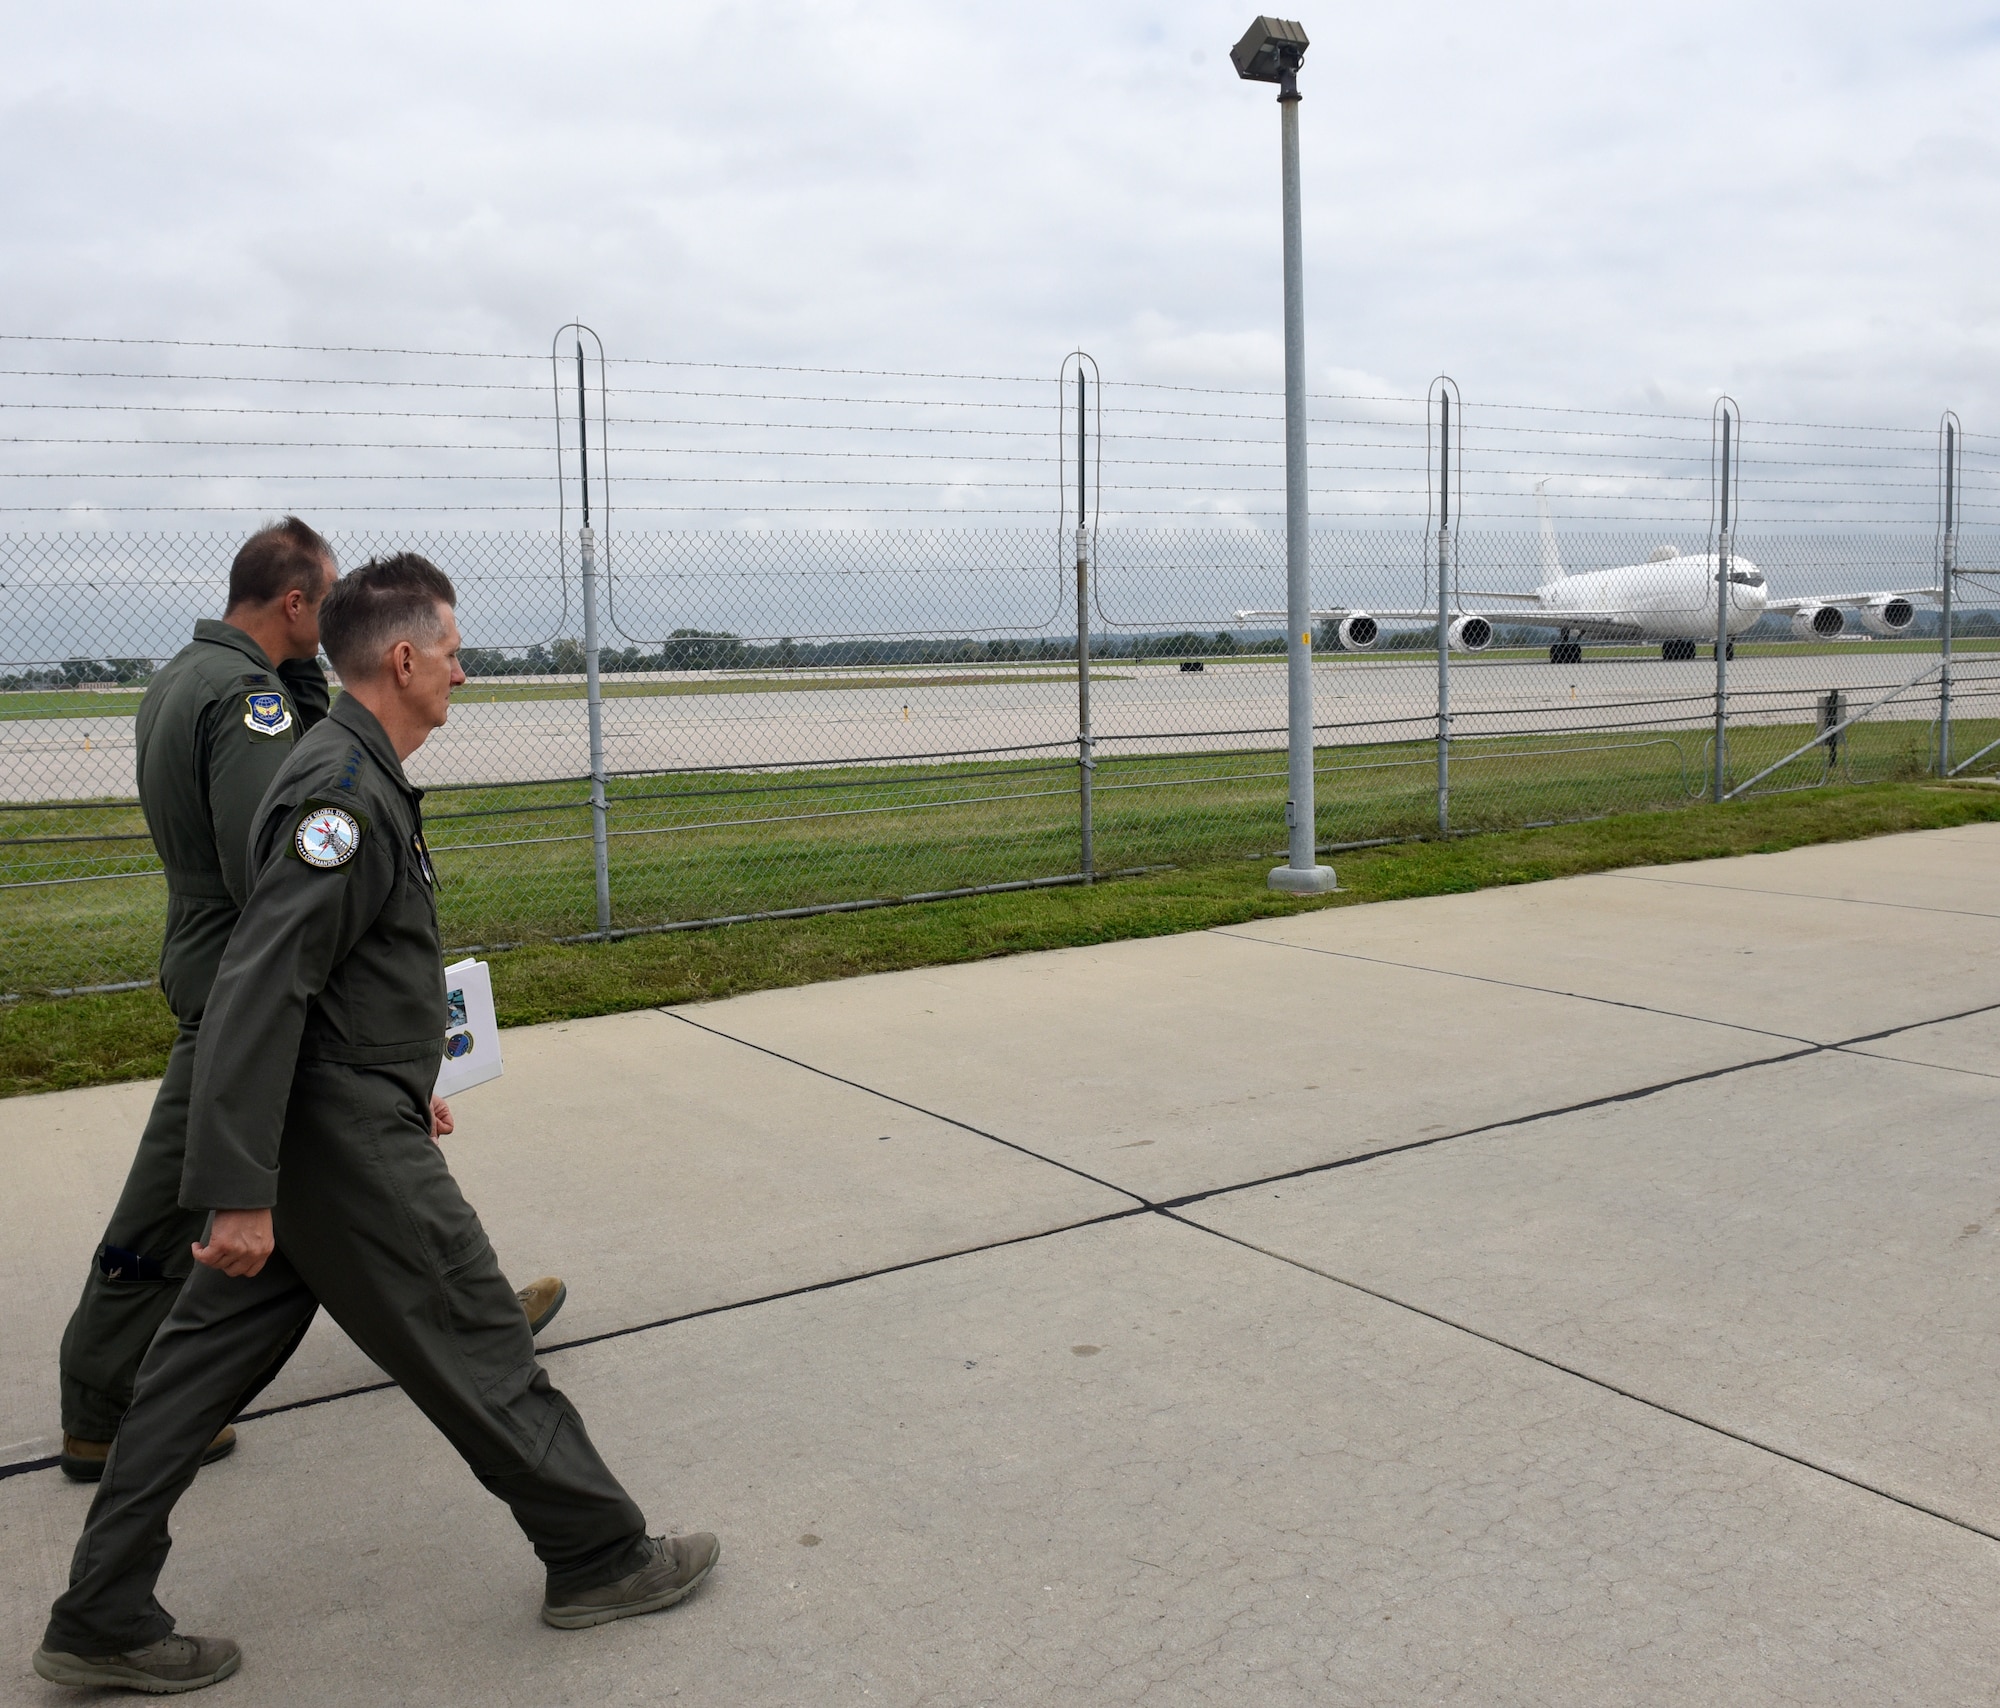 U.S. Air Force Gen. Timothy Ray, Air Force Global Strike Command commander walks the flightline as a U.S. Navy E-6B aircraft, with a crew which includes members of the 625th Strategic Operations Squadron, taxis at Offutt Air Force Base, Nebraska Sept. 13, 2018. The 625 STOS mission is unique to the ICBM community in that it provides the commander of United States Strategic Command with a secondary Minuteman III launch capability through the Airborne Launch Control System. Housed aboard the Navy's E-6B aircraft, the ALCS serves as a vital backup to Minuteman launch control centers. (U.S. Air Force photo by Drew Nystrom)